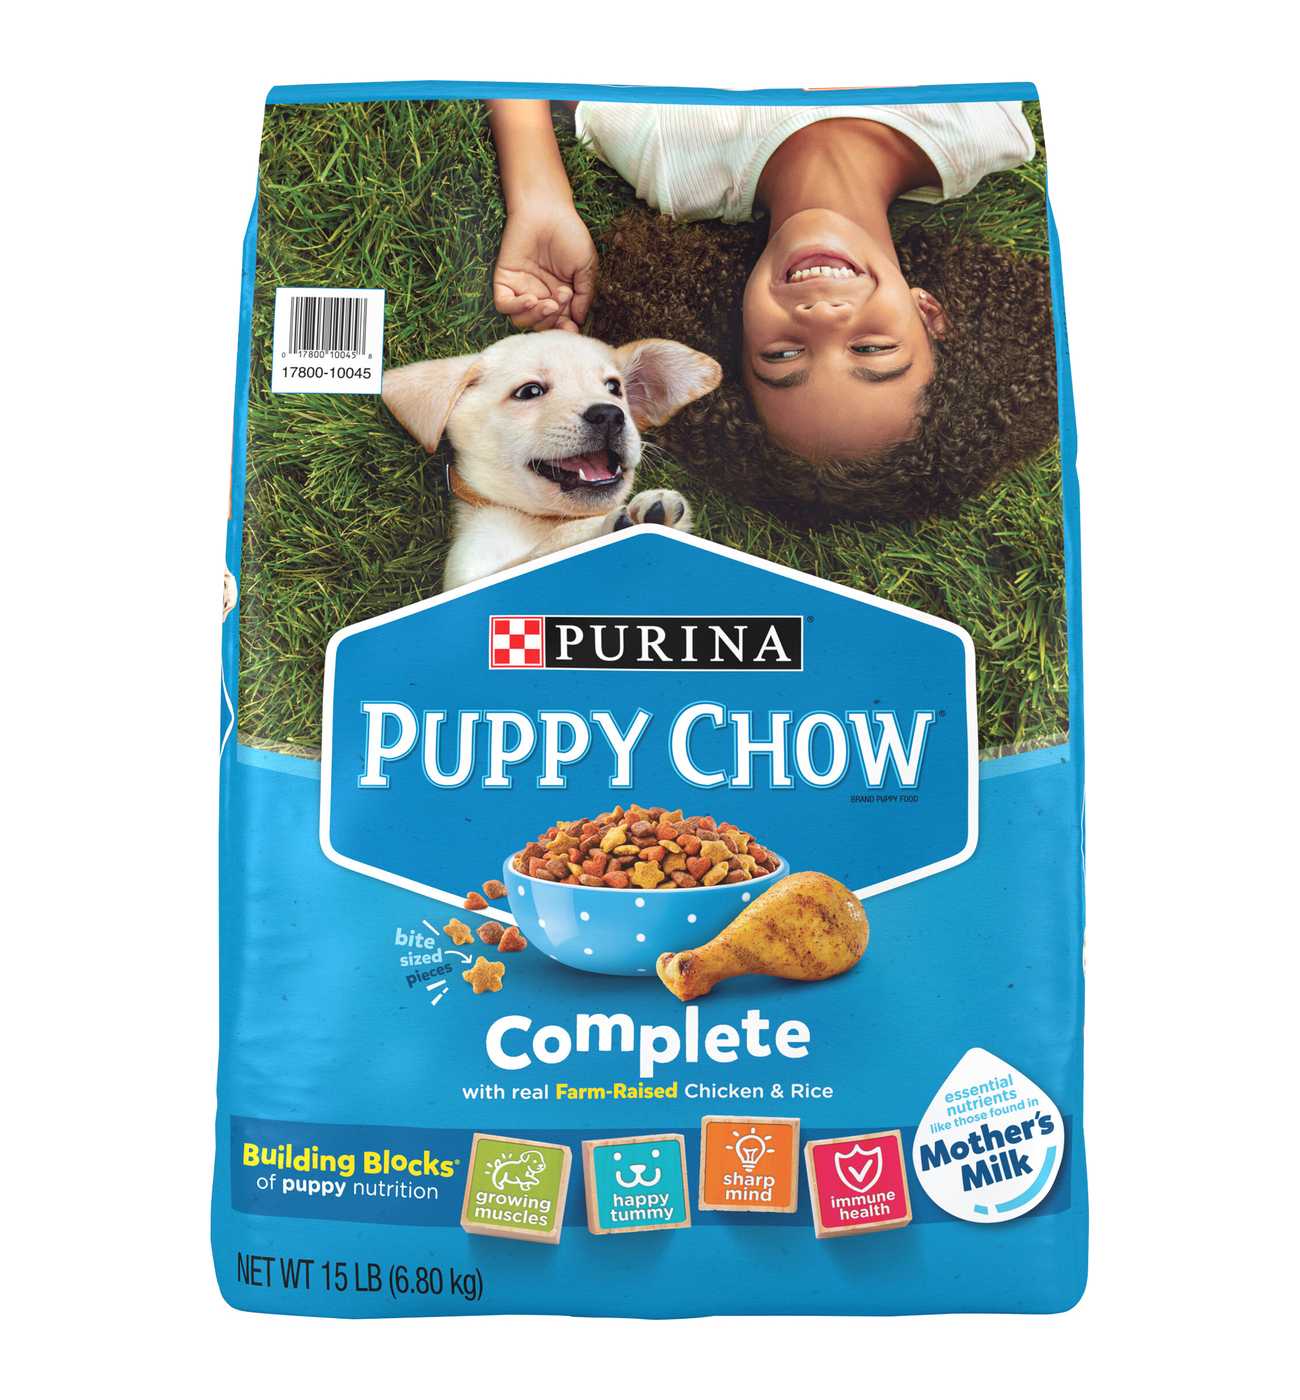 Puppy Chow Complete with Chicken & Rice Dry Puppy Food; image 1 of 2